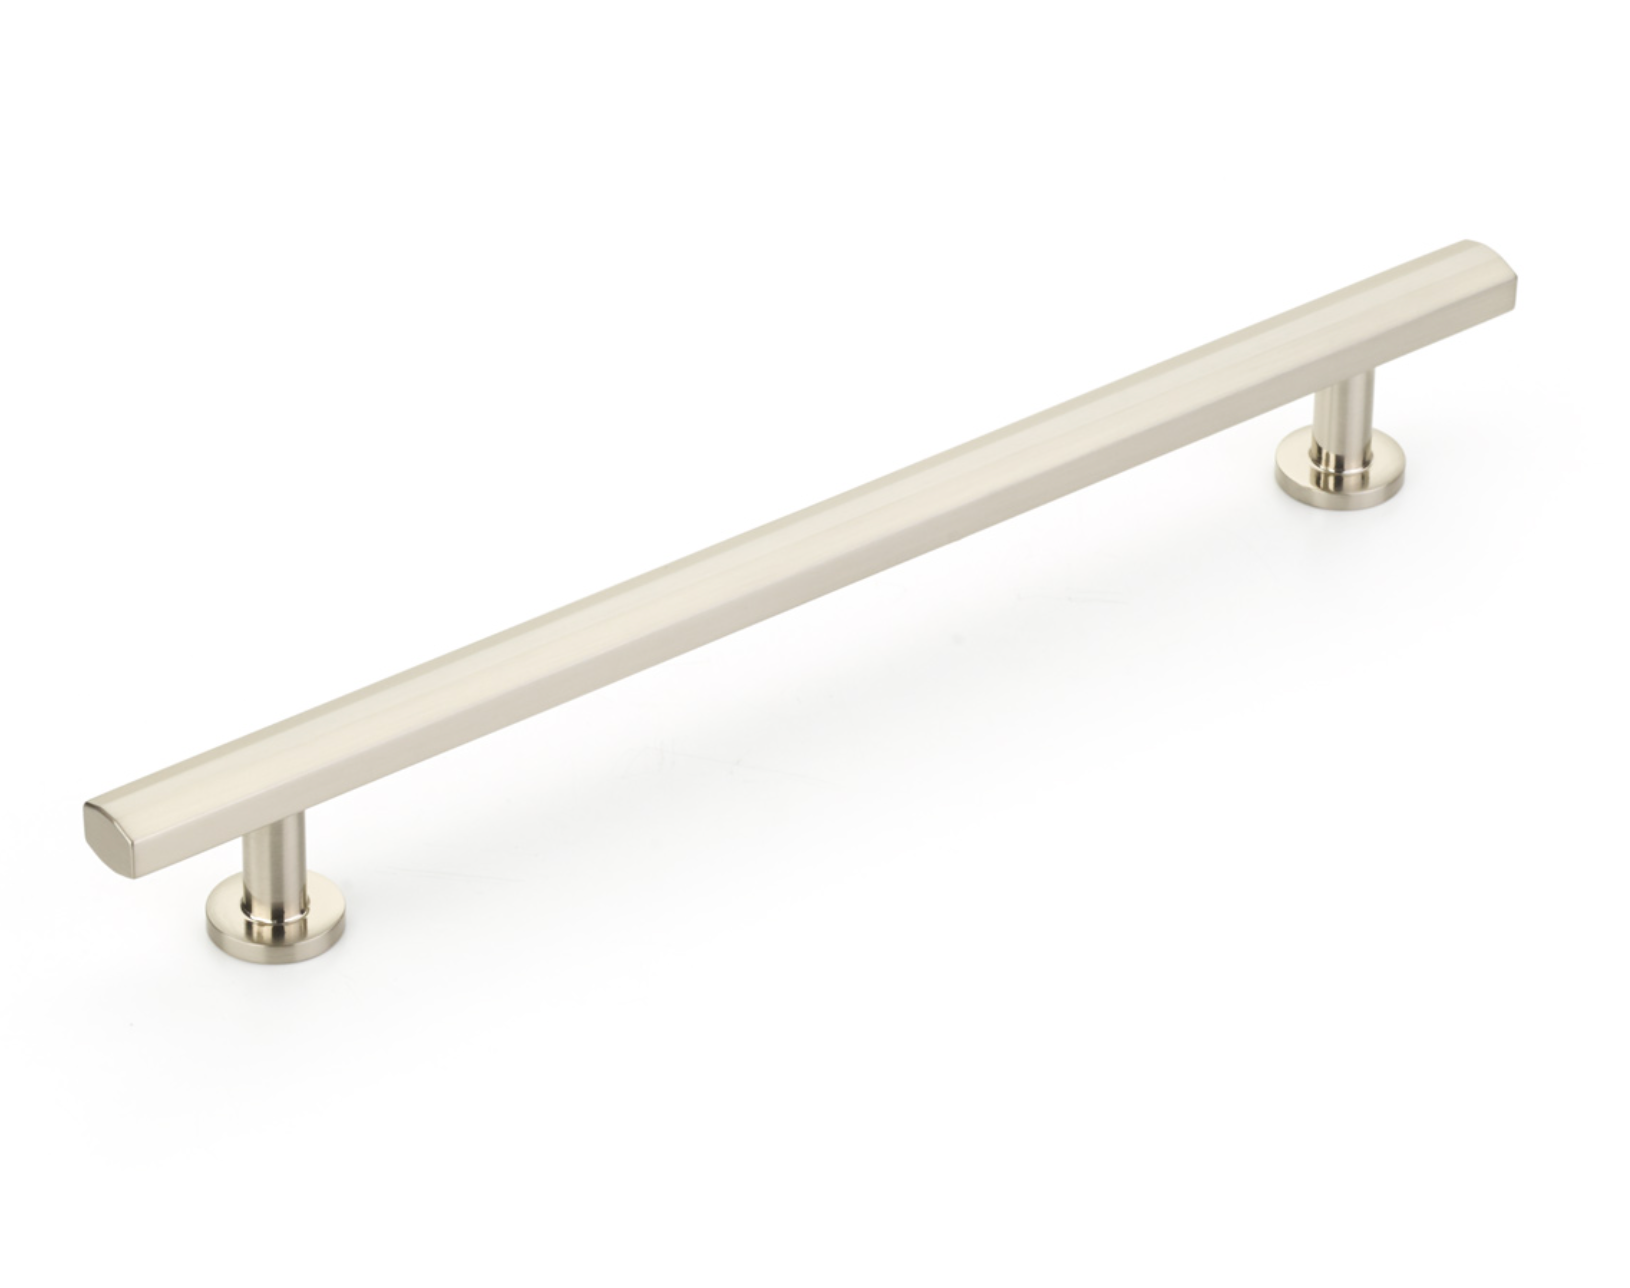 Brushed Nickel "Heather" T-Bar Cabinet Knobs and Drawer Pulls